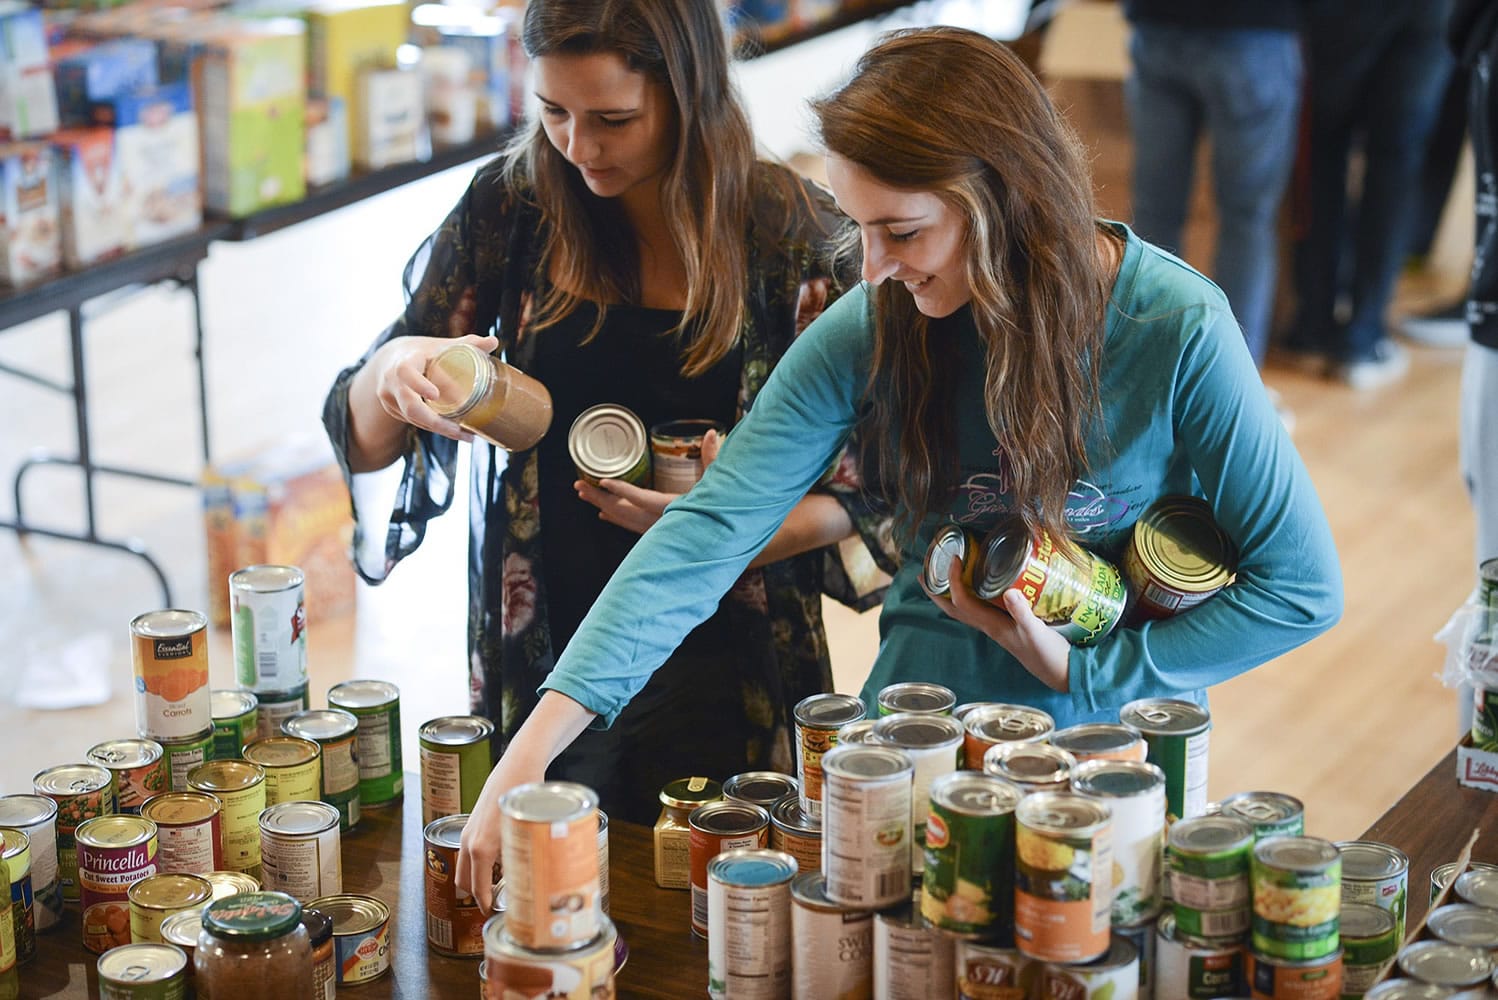 Crissaya Wood, left, and Meghan Ashton, seniors at Columbia Adventist Academy, sort donated food for The Children's Center during a volunteer outing Wednesday morning.